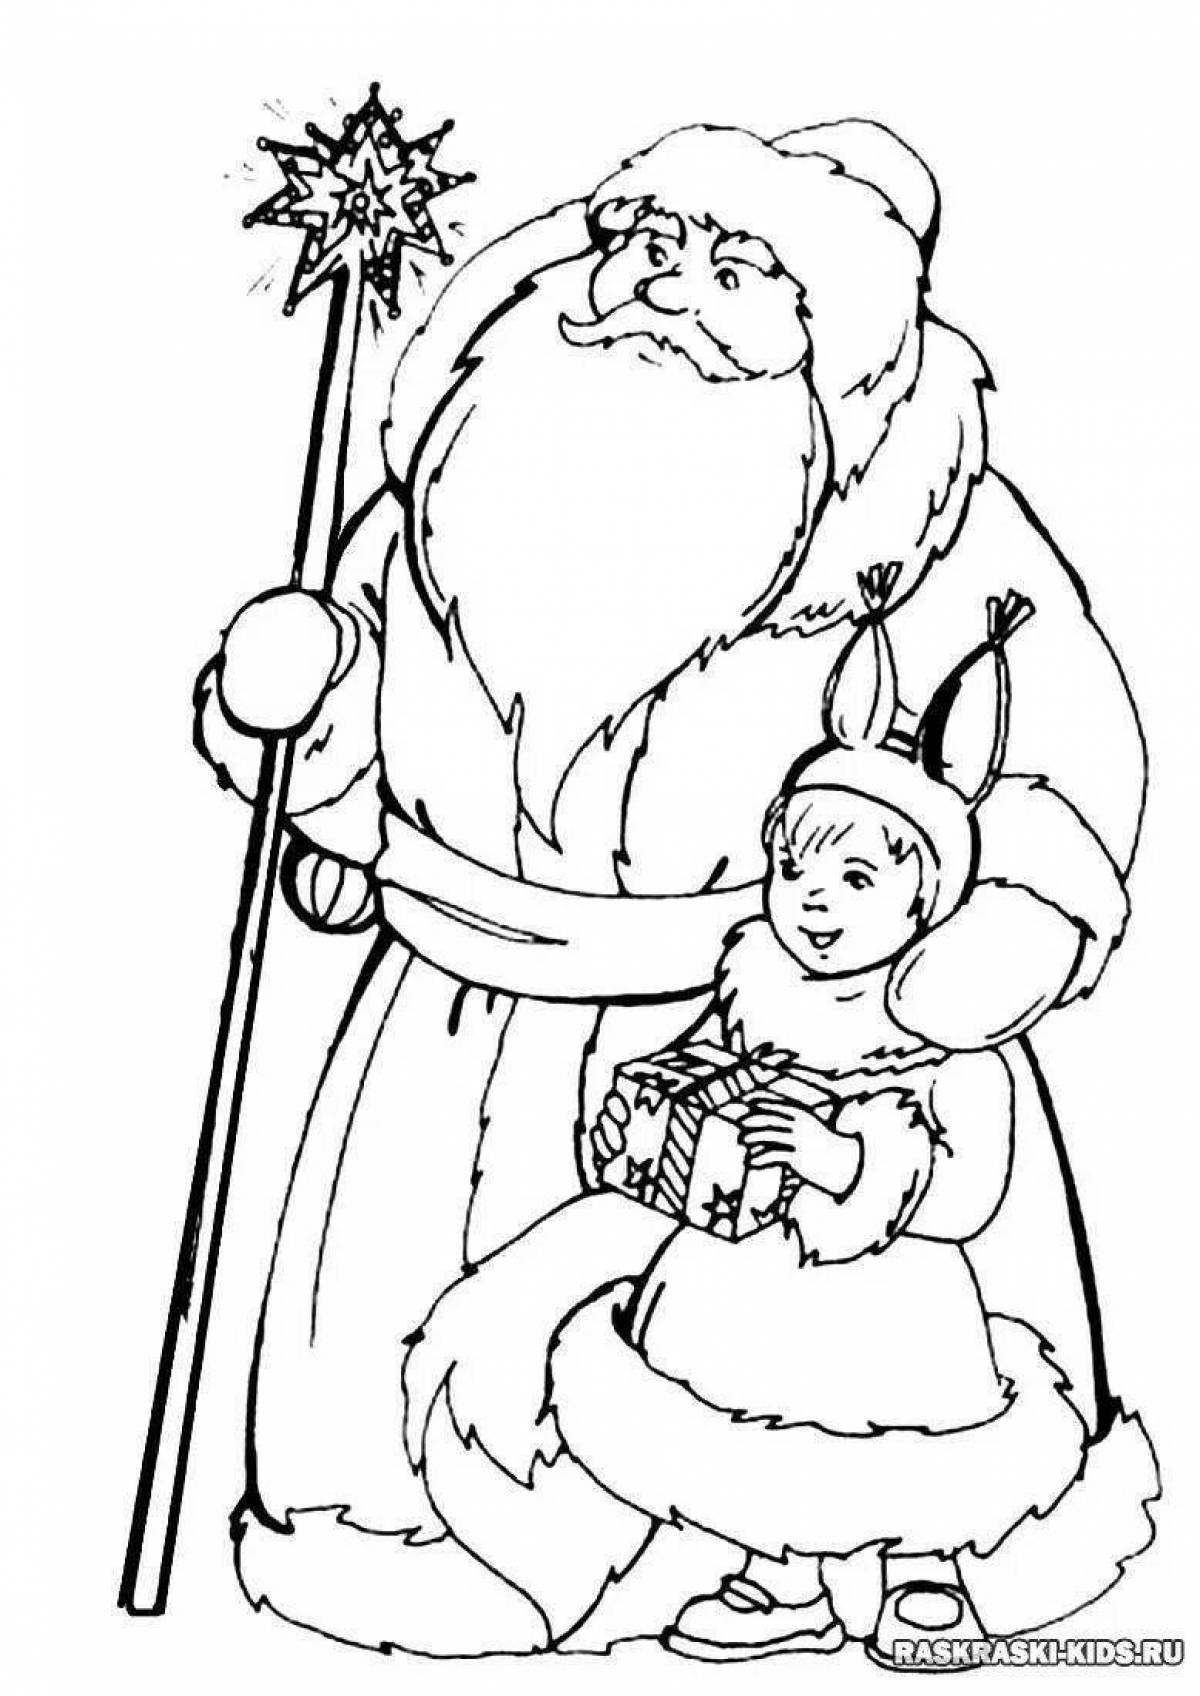 Fabulous coloring book Santa Claus and Snow Maiden